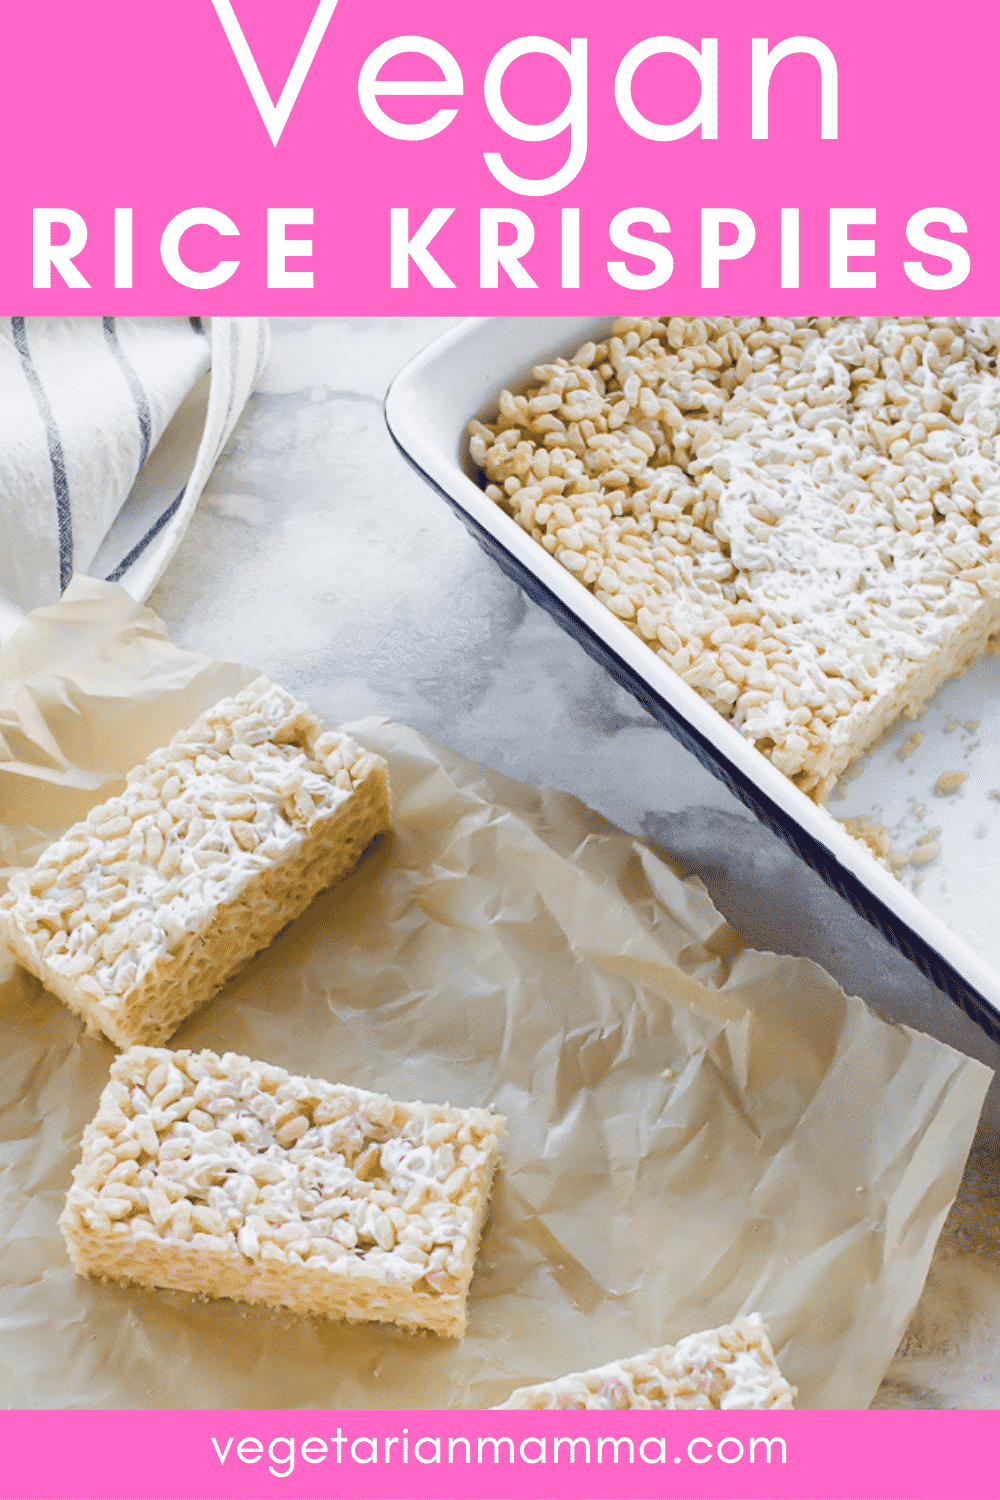 Vegan Rice Krispie Treats are the perfect plant-based sweet snack! This 3-ingredient recipe is super simple to whip up on an afternoon. #vegandessert #ricekrispietreats #veganricekrispies